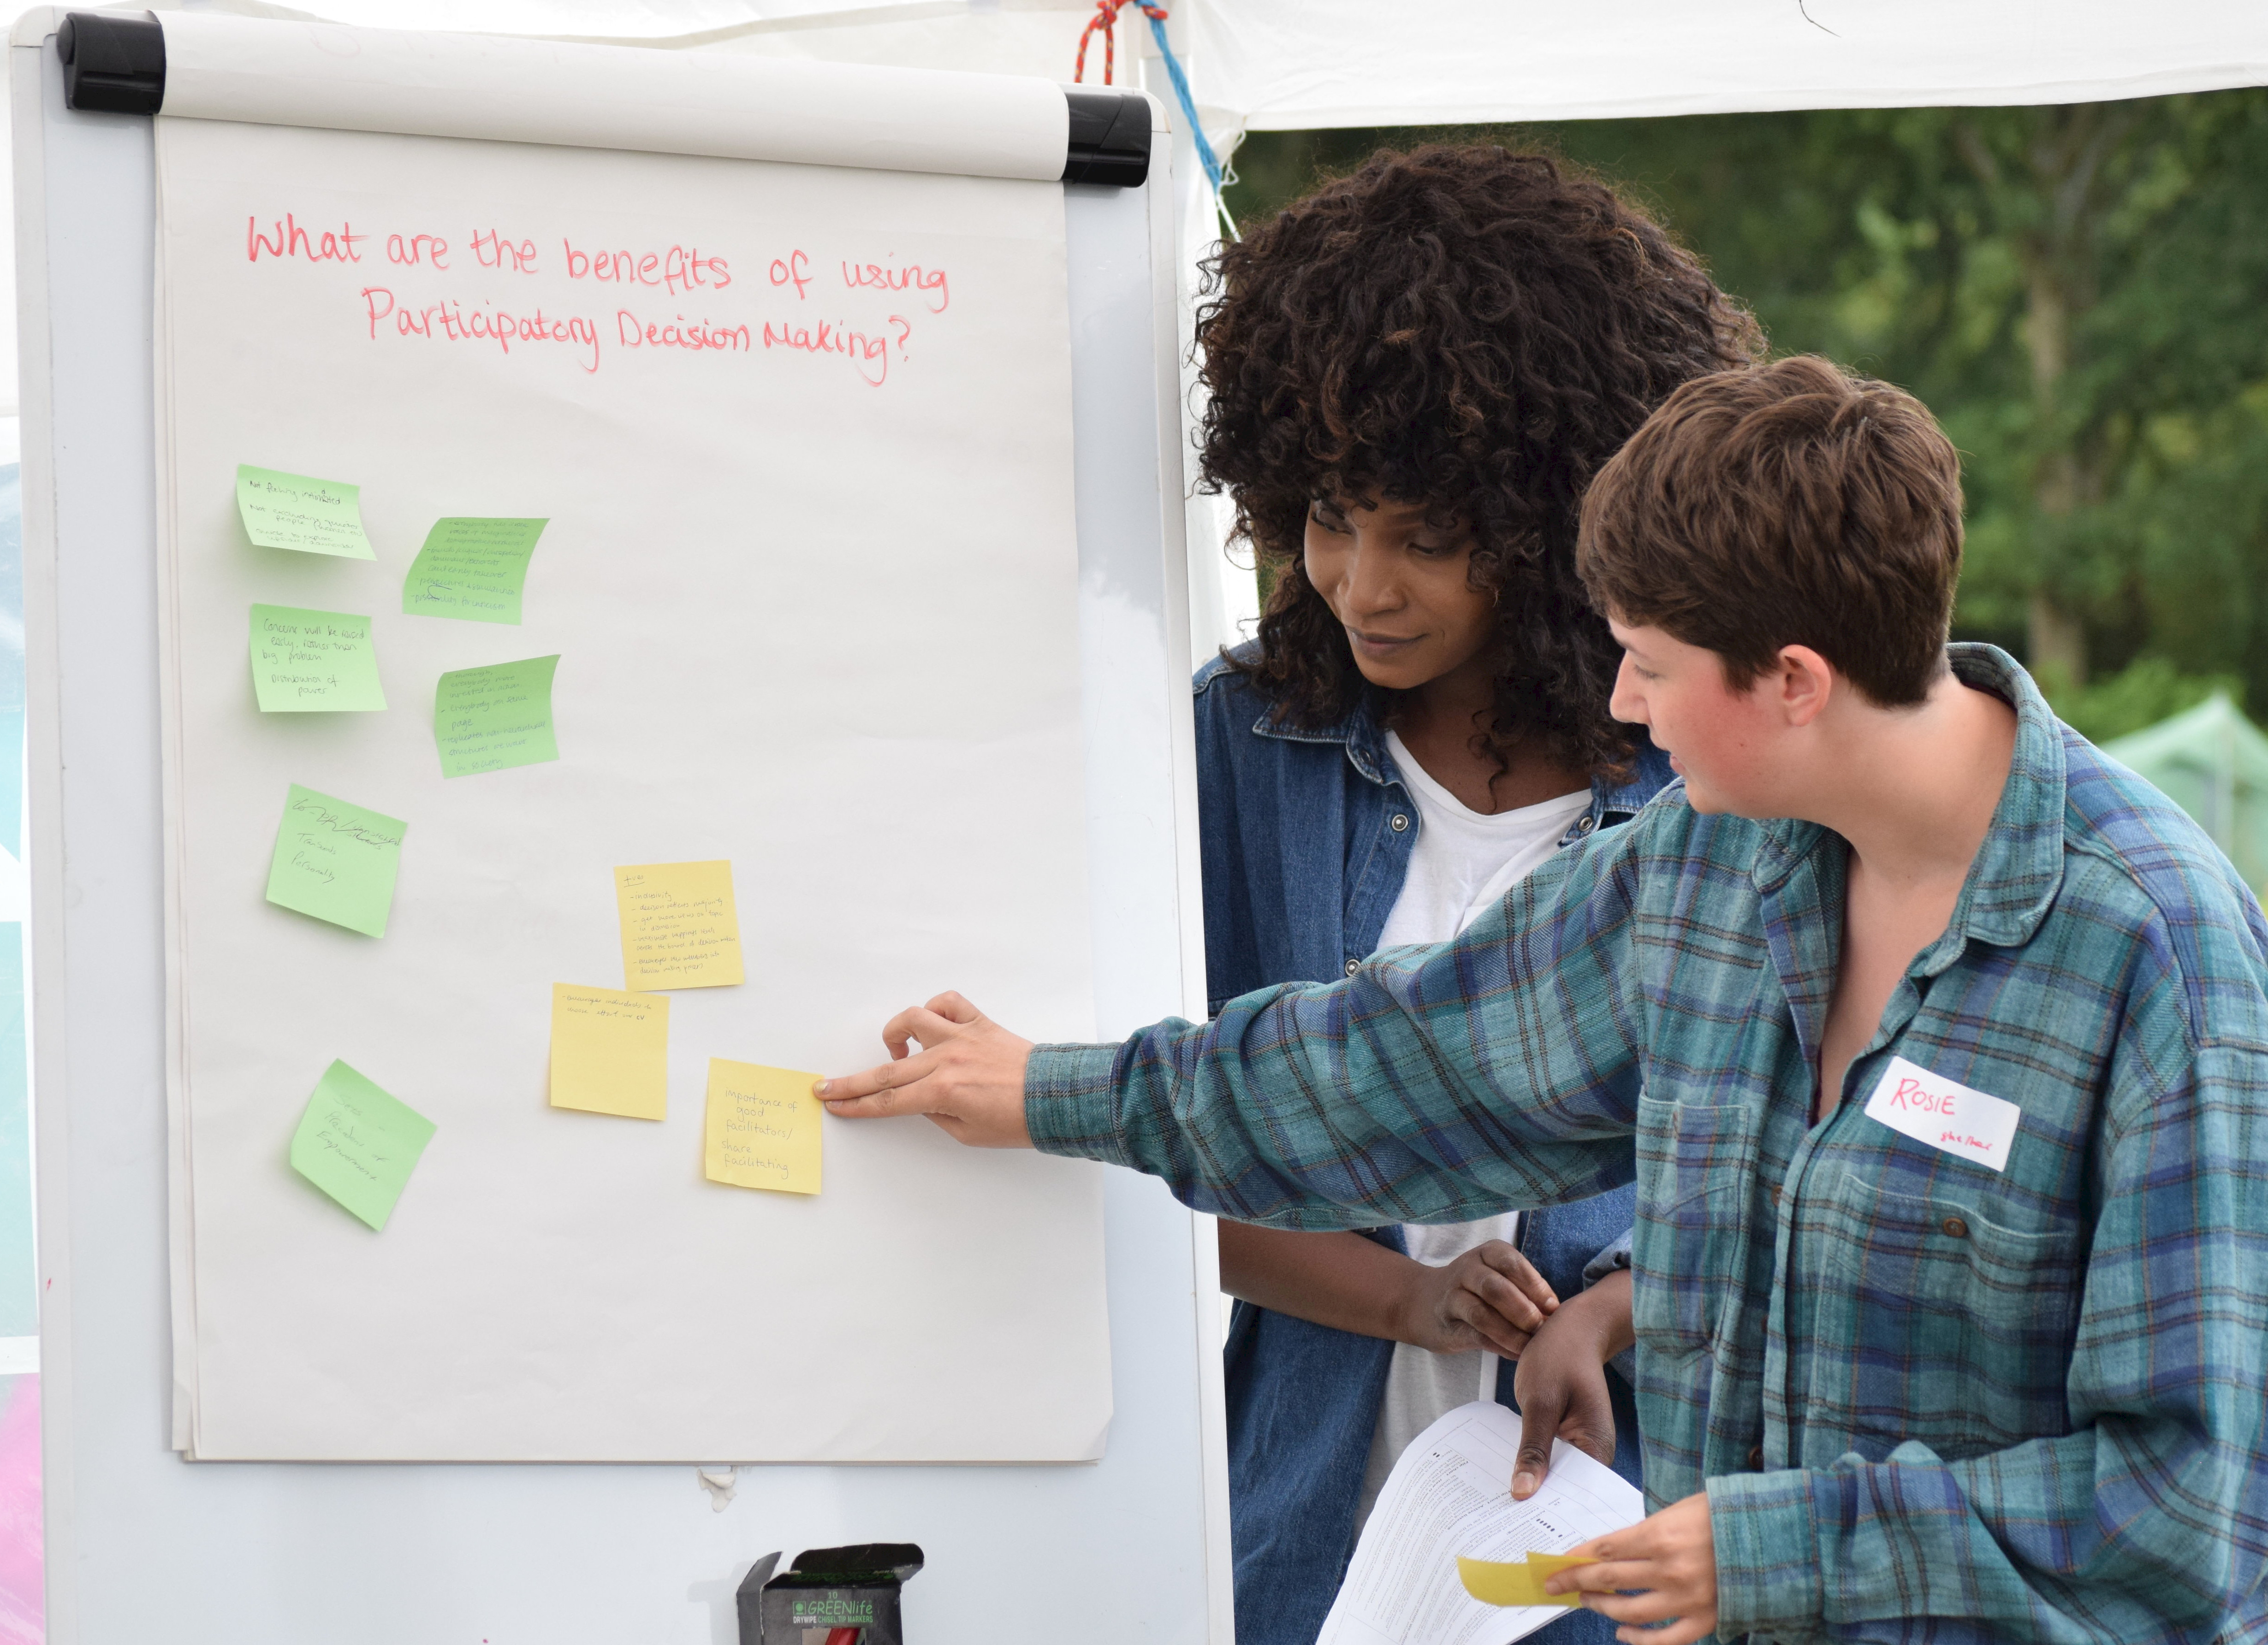 Two young campaigners leading a workshop stand in front of a flipchart paper which says 'what are the benefits of participatory decision making'?'